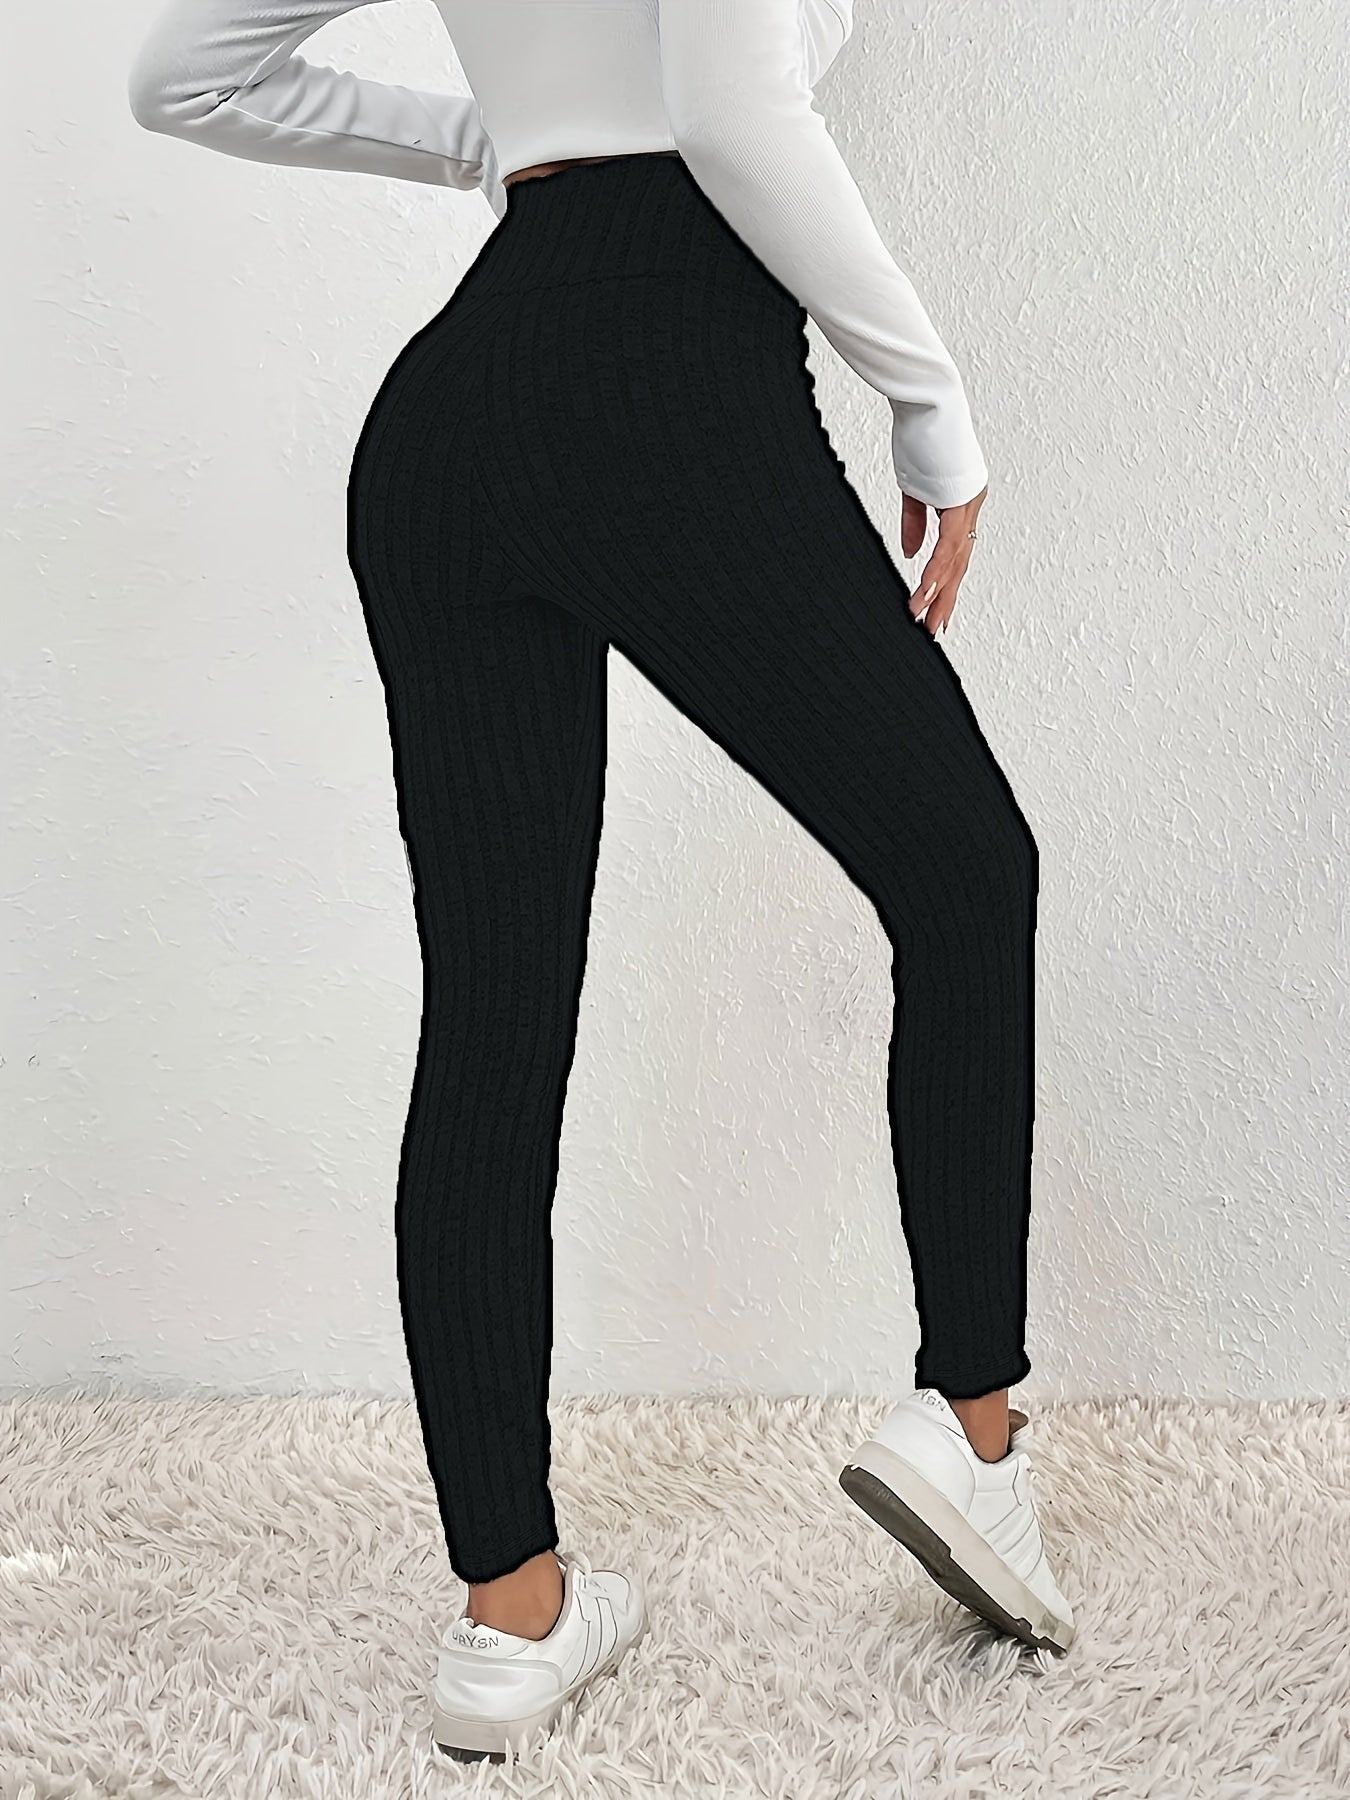 Ribbed High Waist Pants, Casual Skinny Pants For Spring & Fall, Women's Clothing